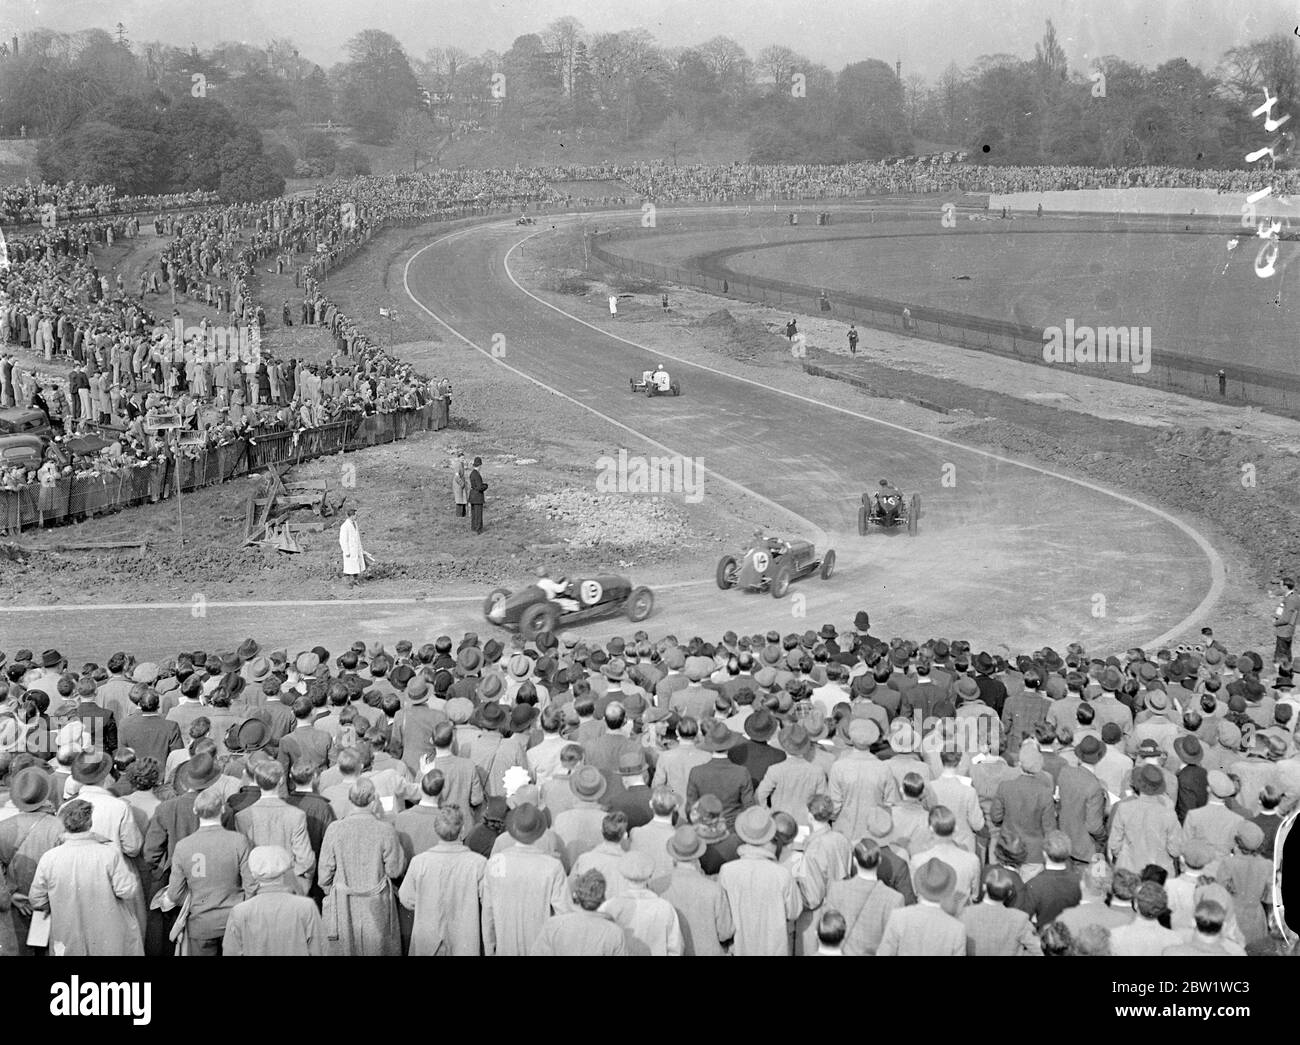 First race of a new Crystal Palace road racing circuit. The Coronation Trophy race was the inaugural event of the new Crystal Palace road racing circuit. Many famous drivers were entered hundred and 20 miles an hour were expected. Photo shows, a general view of the track during the race. 24 April 1937 Stock Photo